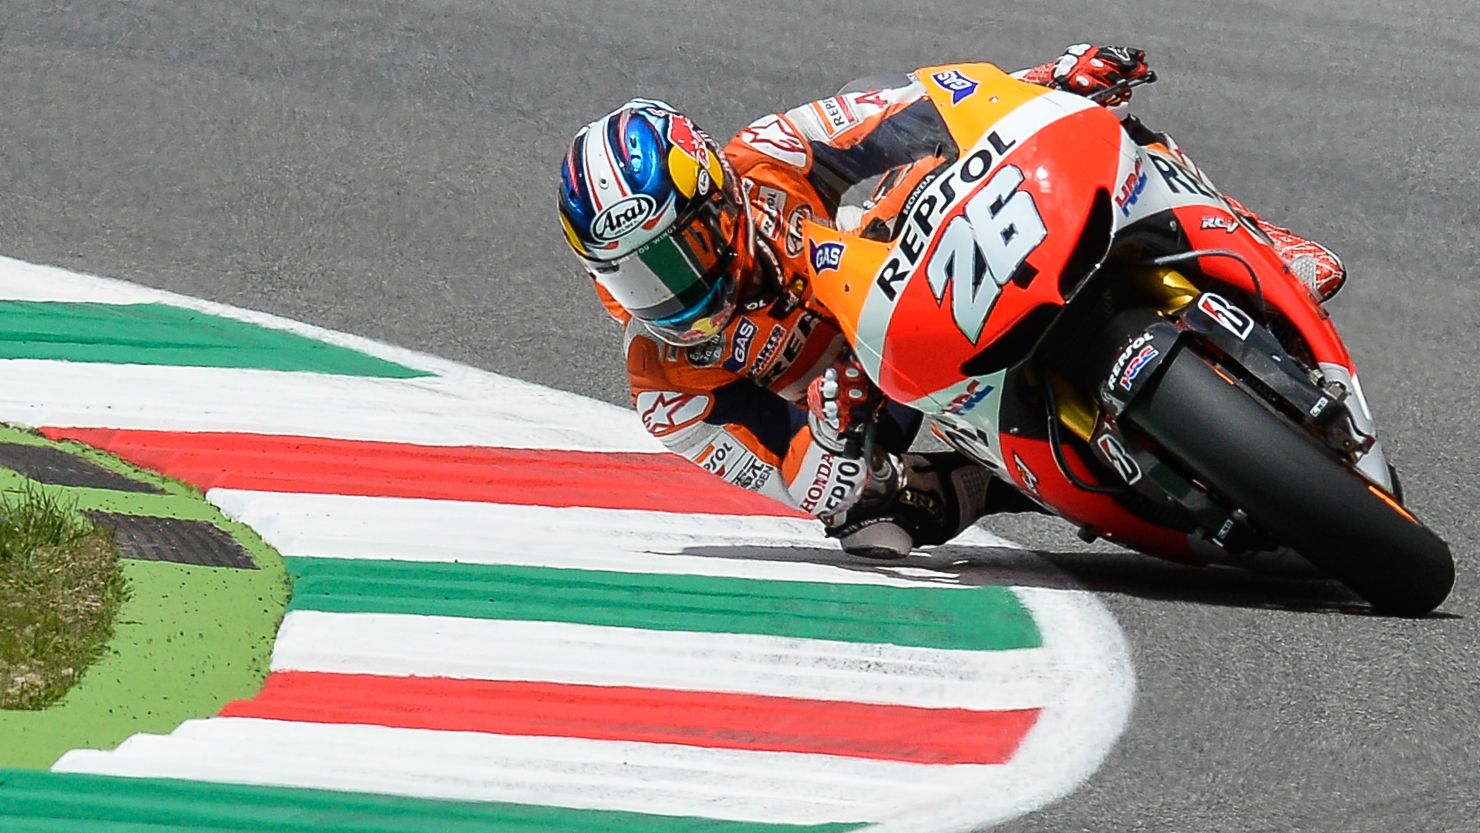 Spanish motorcyclist Dani Pedrosa is seeking to win at Mugello for the first time since 2010.